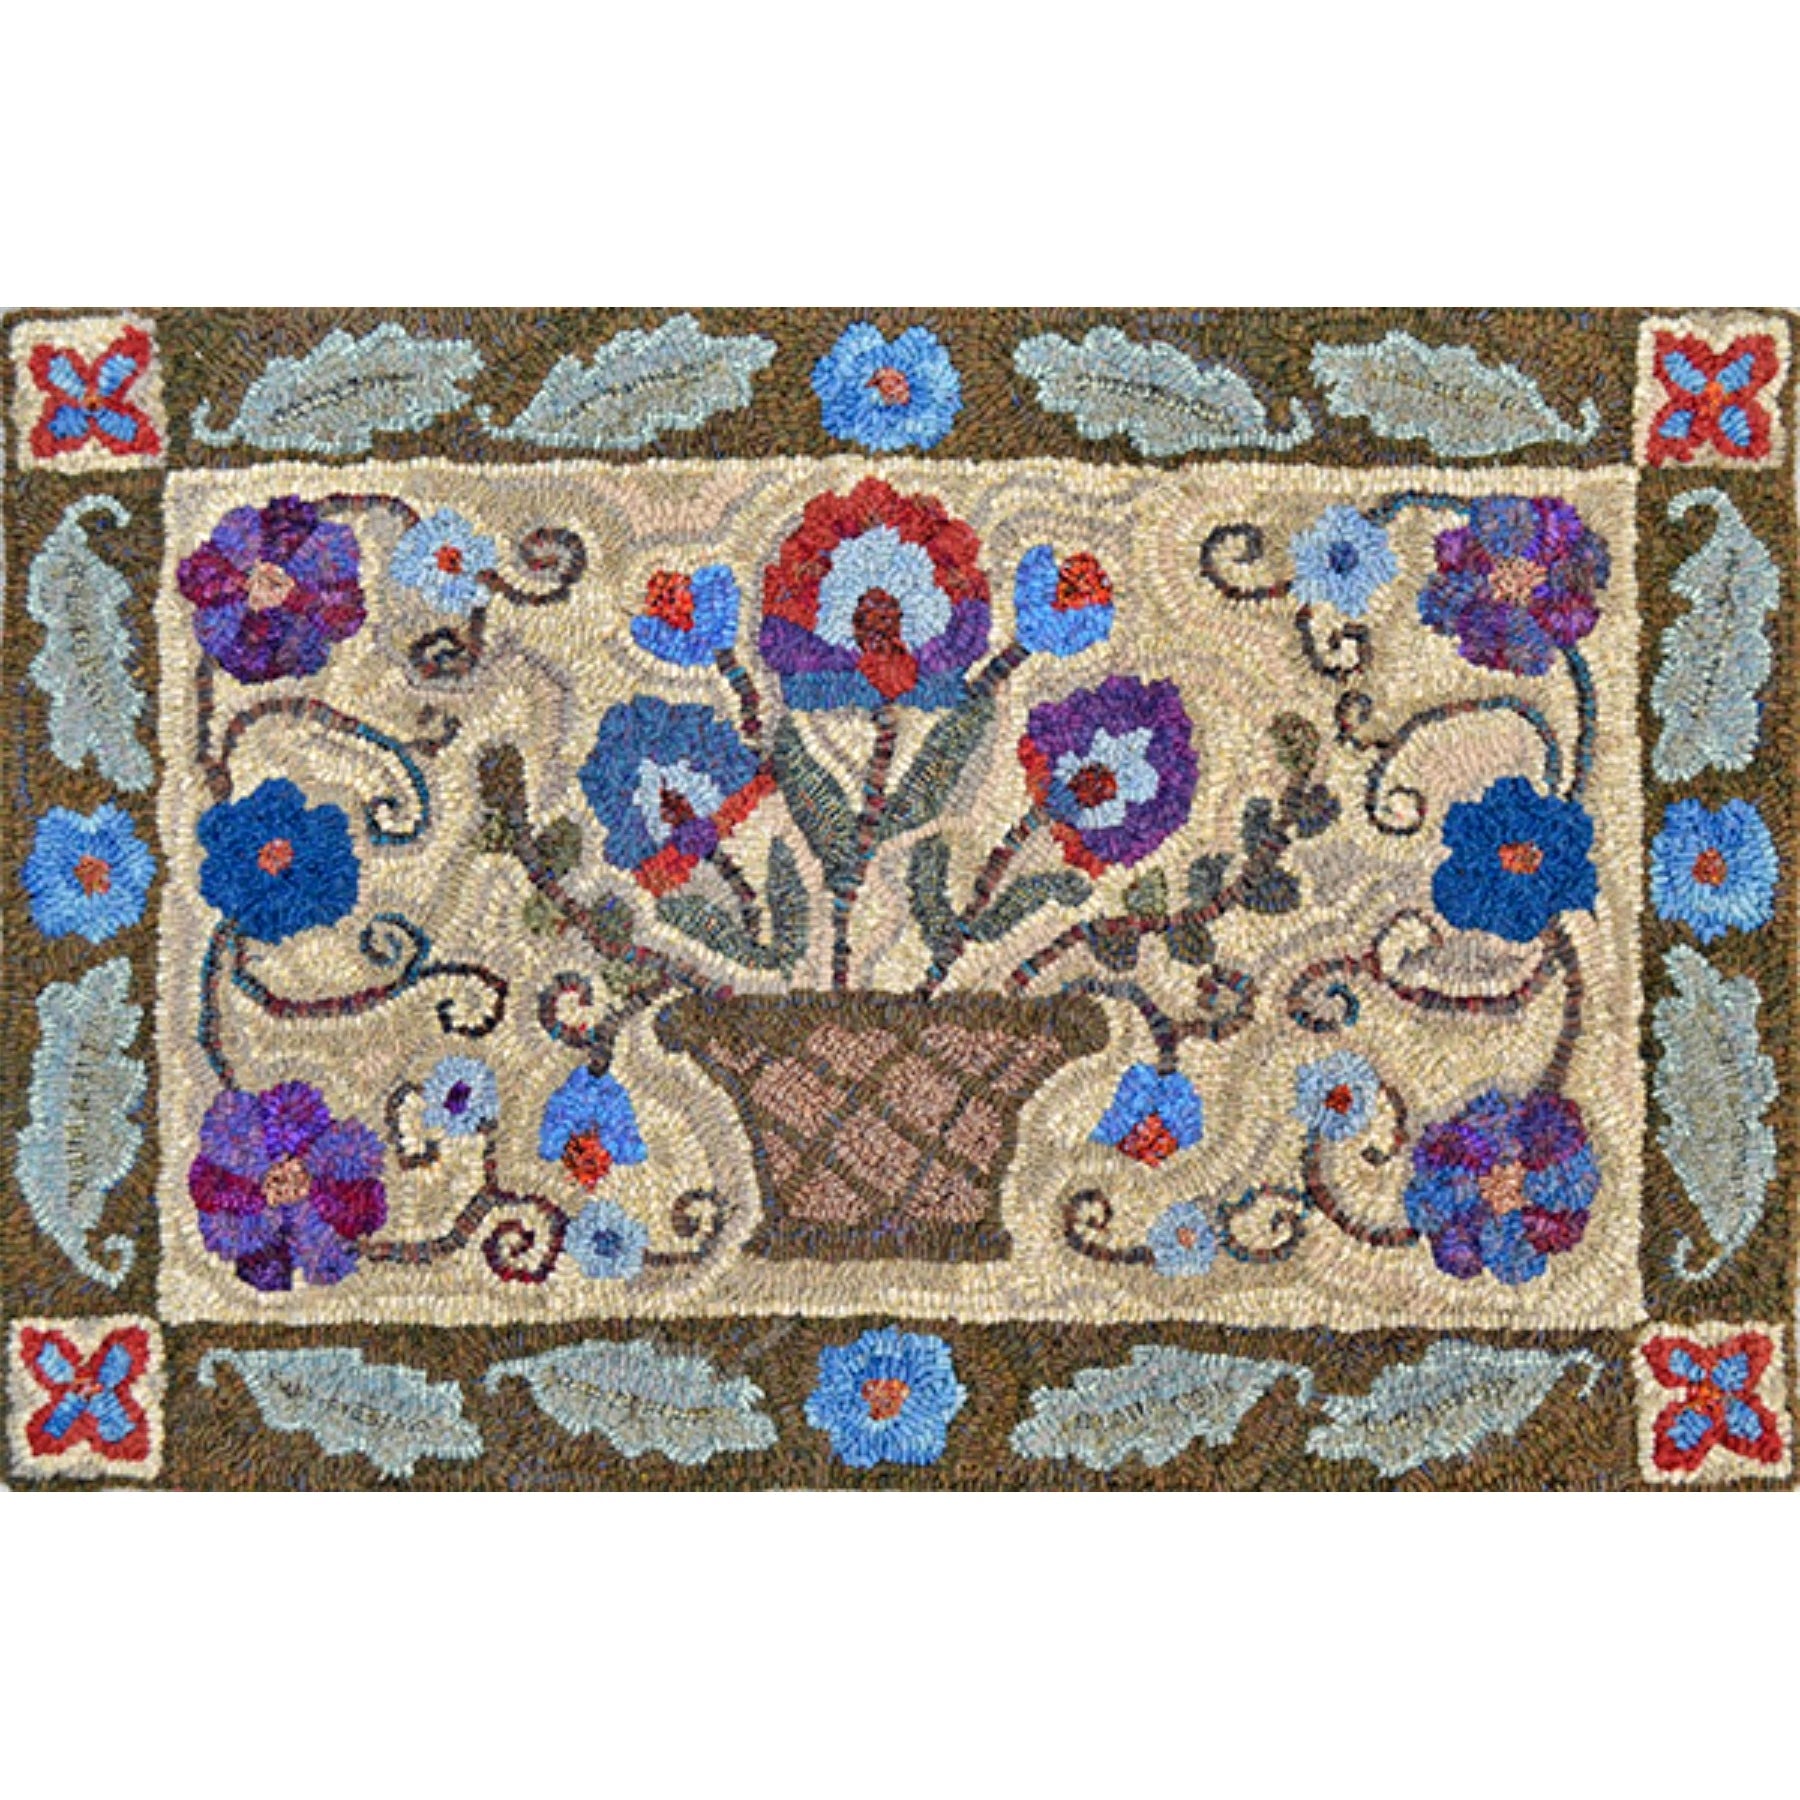 Janie's Rug, rug hooked by Christa Bowling